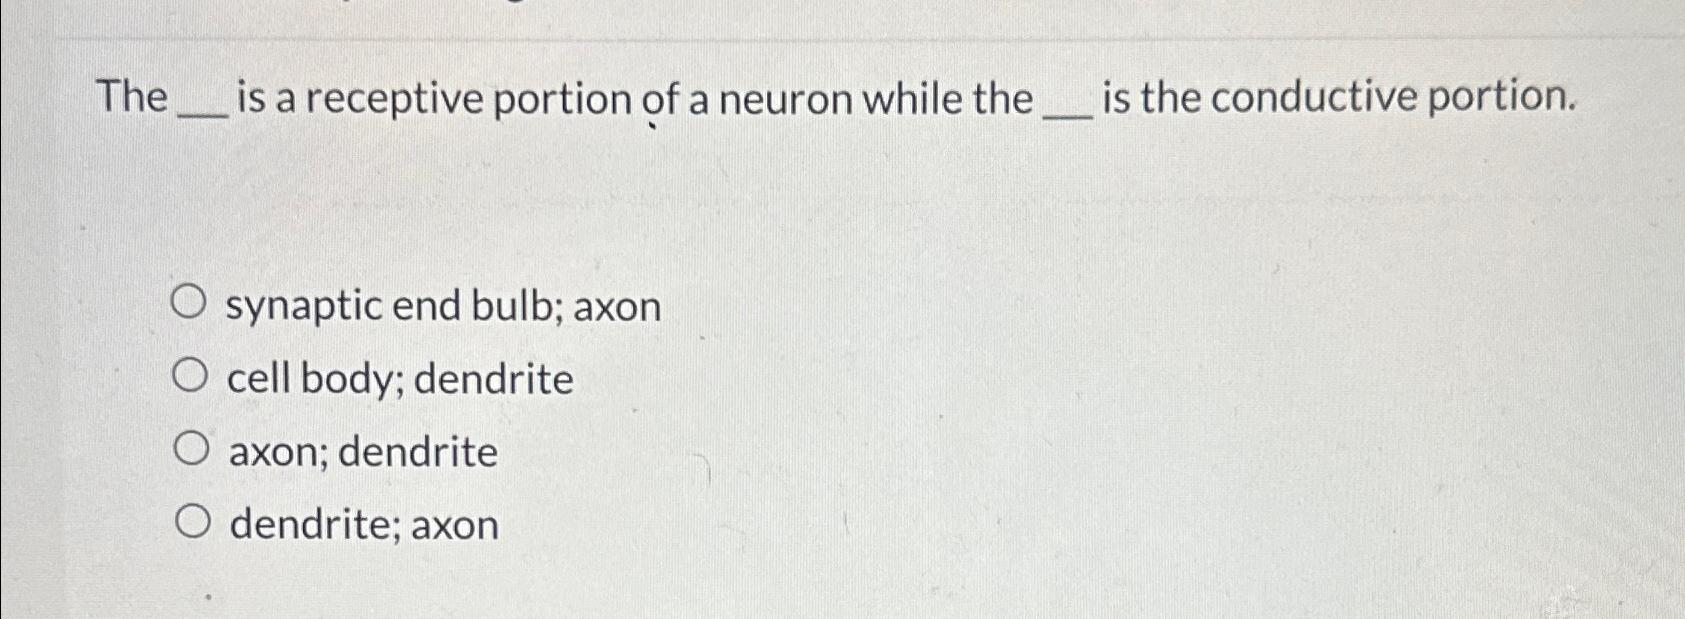 Which is the Main Receptive Portion of the Neuron